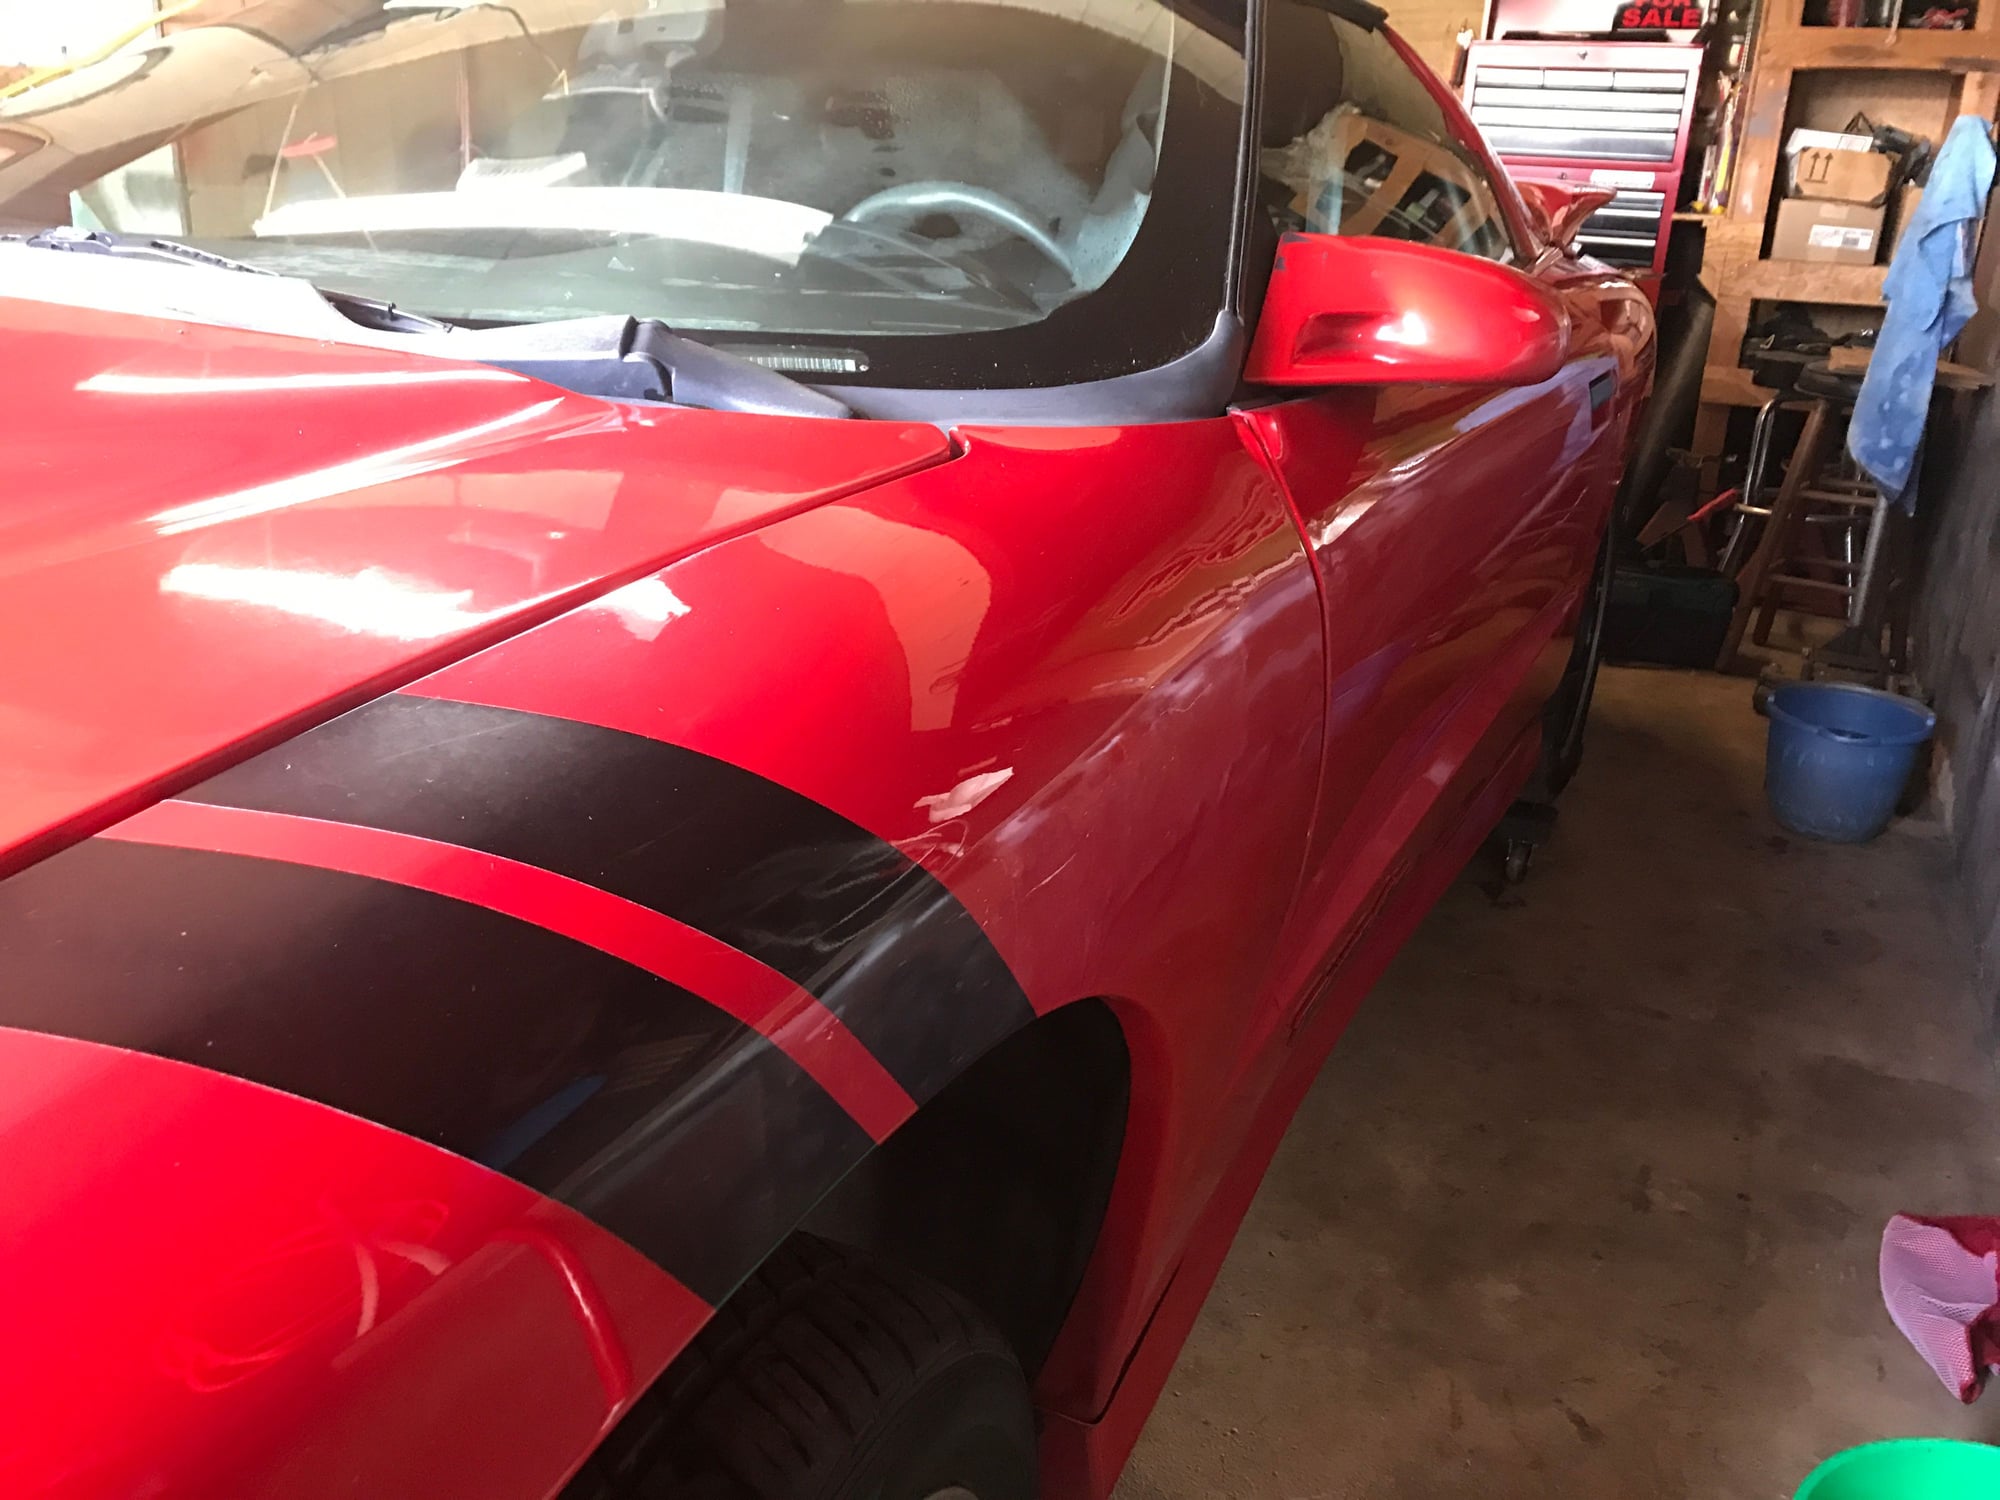 1996 Pontiac Firebird - 1996 Pontiac trans am ws6 roller - Used - VIN 2g2fv22p5t2217505 - 95,000 Miles - 2WD - Manual - Coupe - Red - Hanover Park, IL 60133, United States